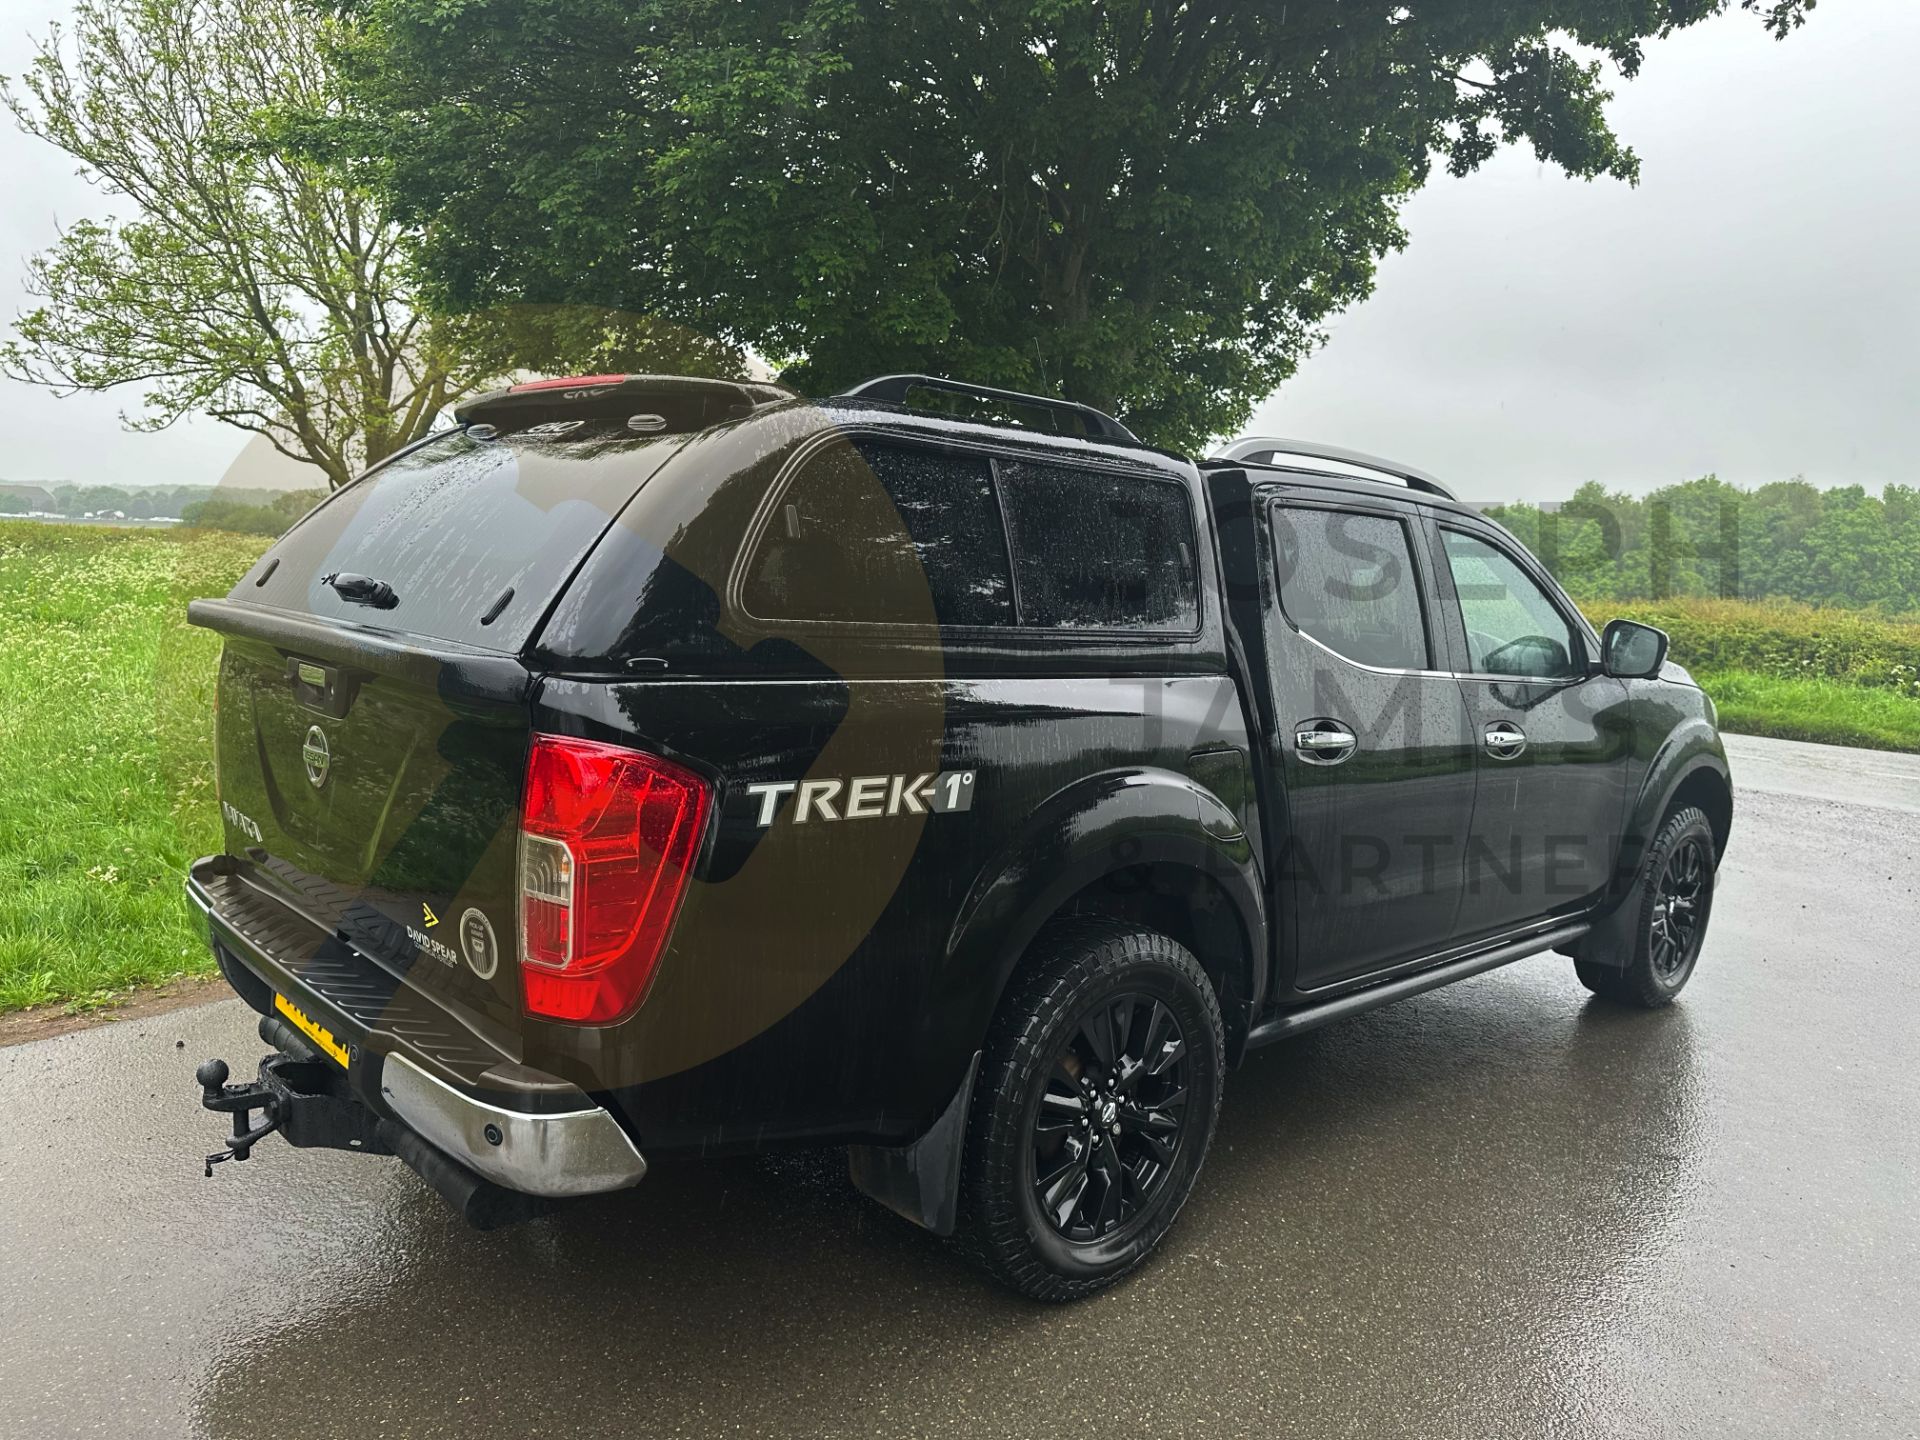 (ON SALE) NISSAN NAVARA *TREK-1 EDITION* DOUBLE CAB PICK-UP (2018 - EURO 6) 2.3 DCI - AUTOMATIC - Image 12 of 52